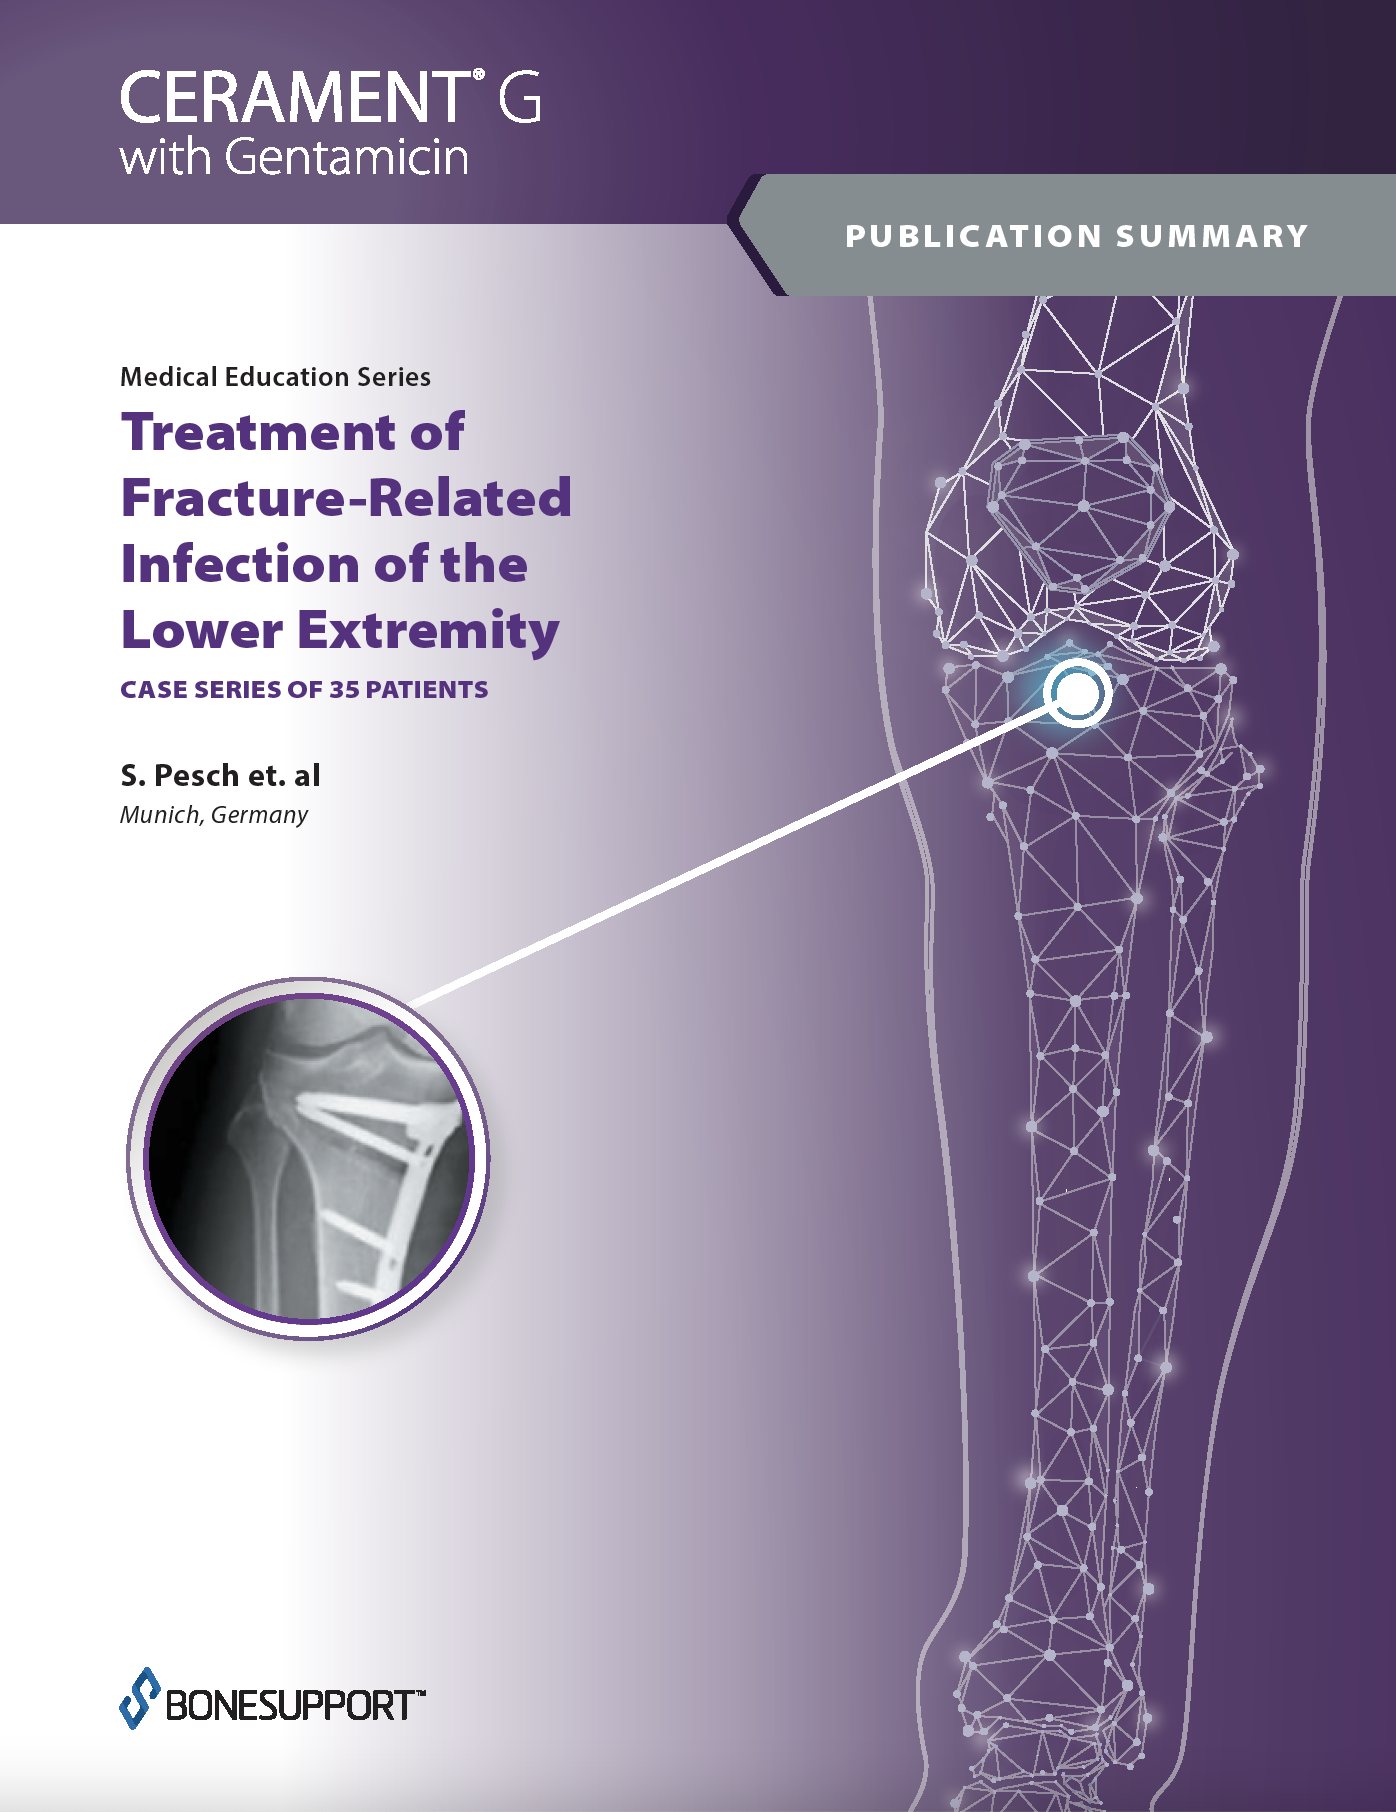 Treatment of Fracture-Related Infection of the Lower Extremity